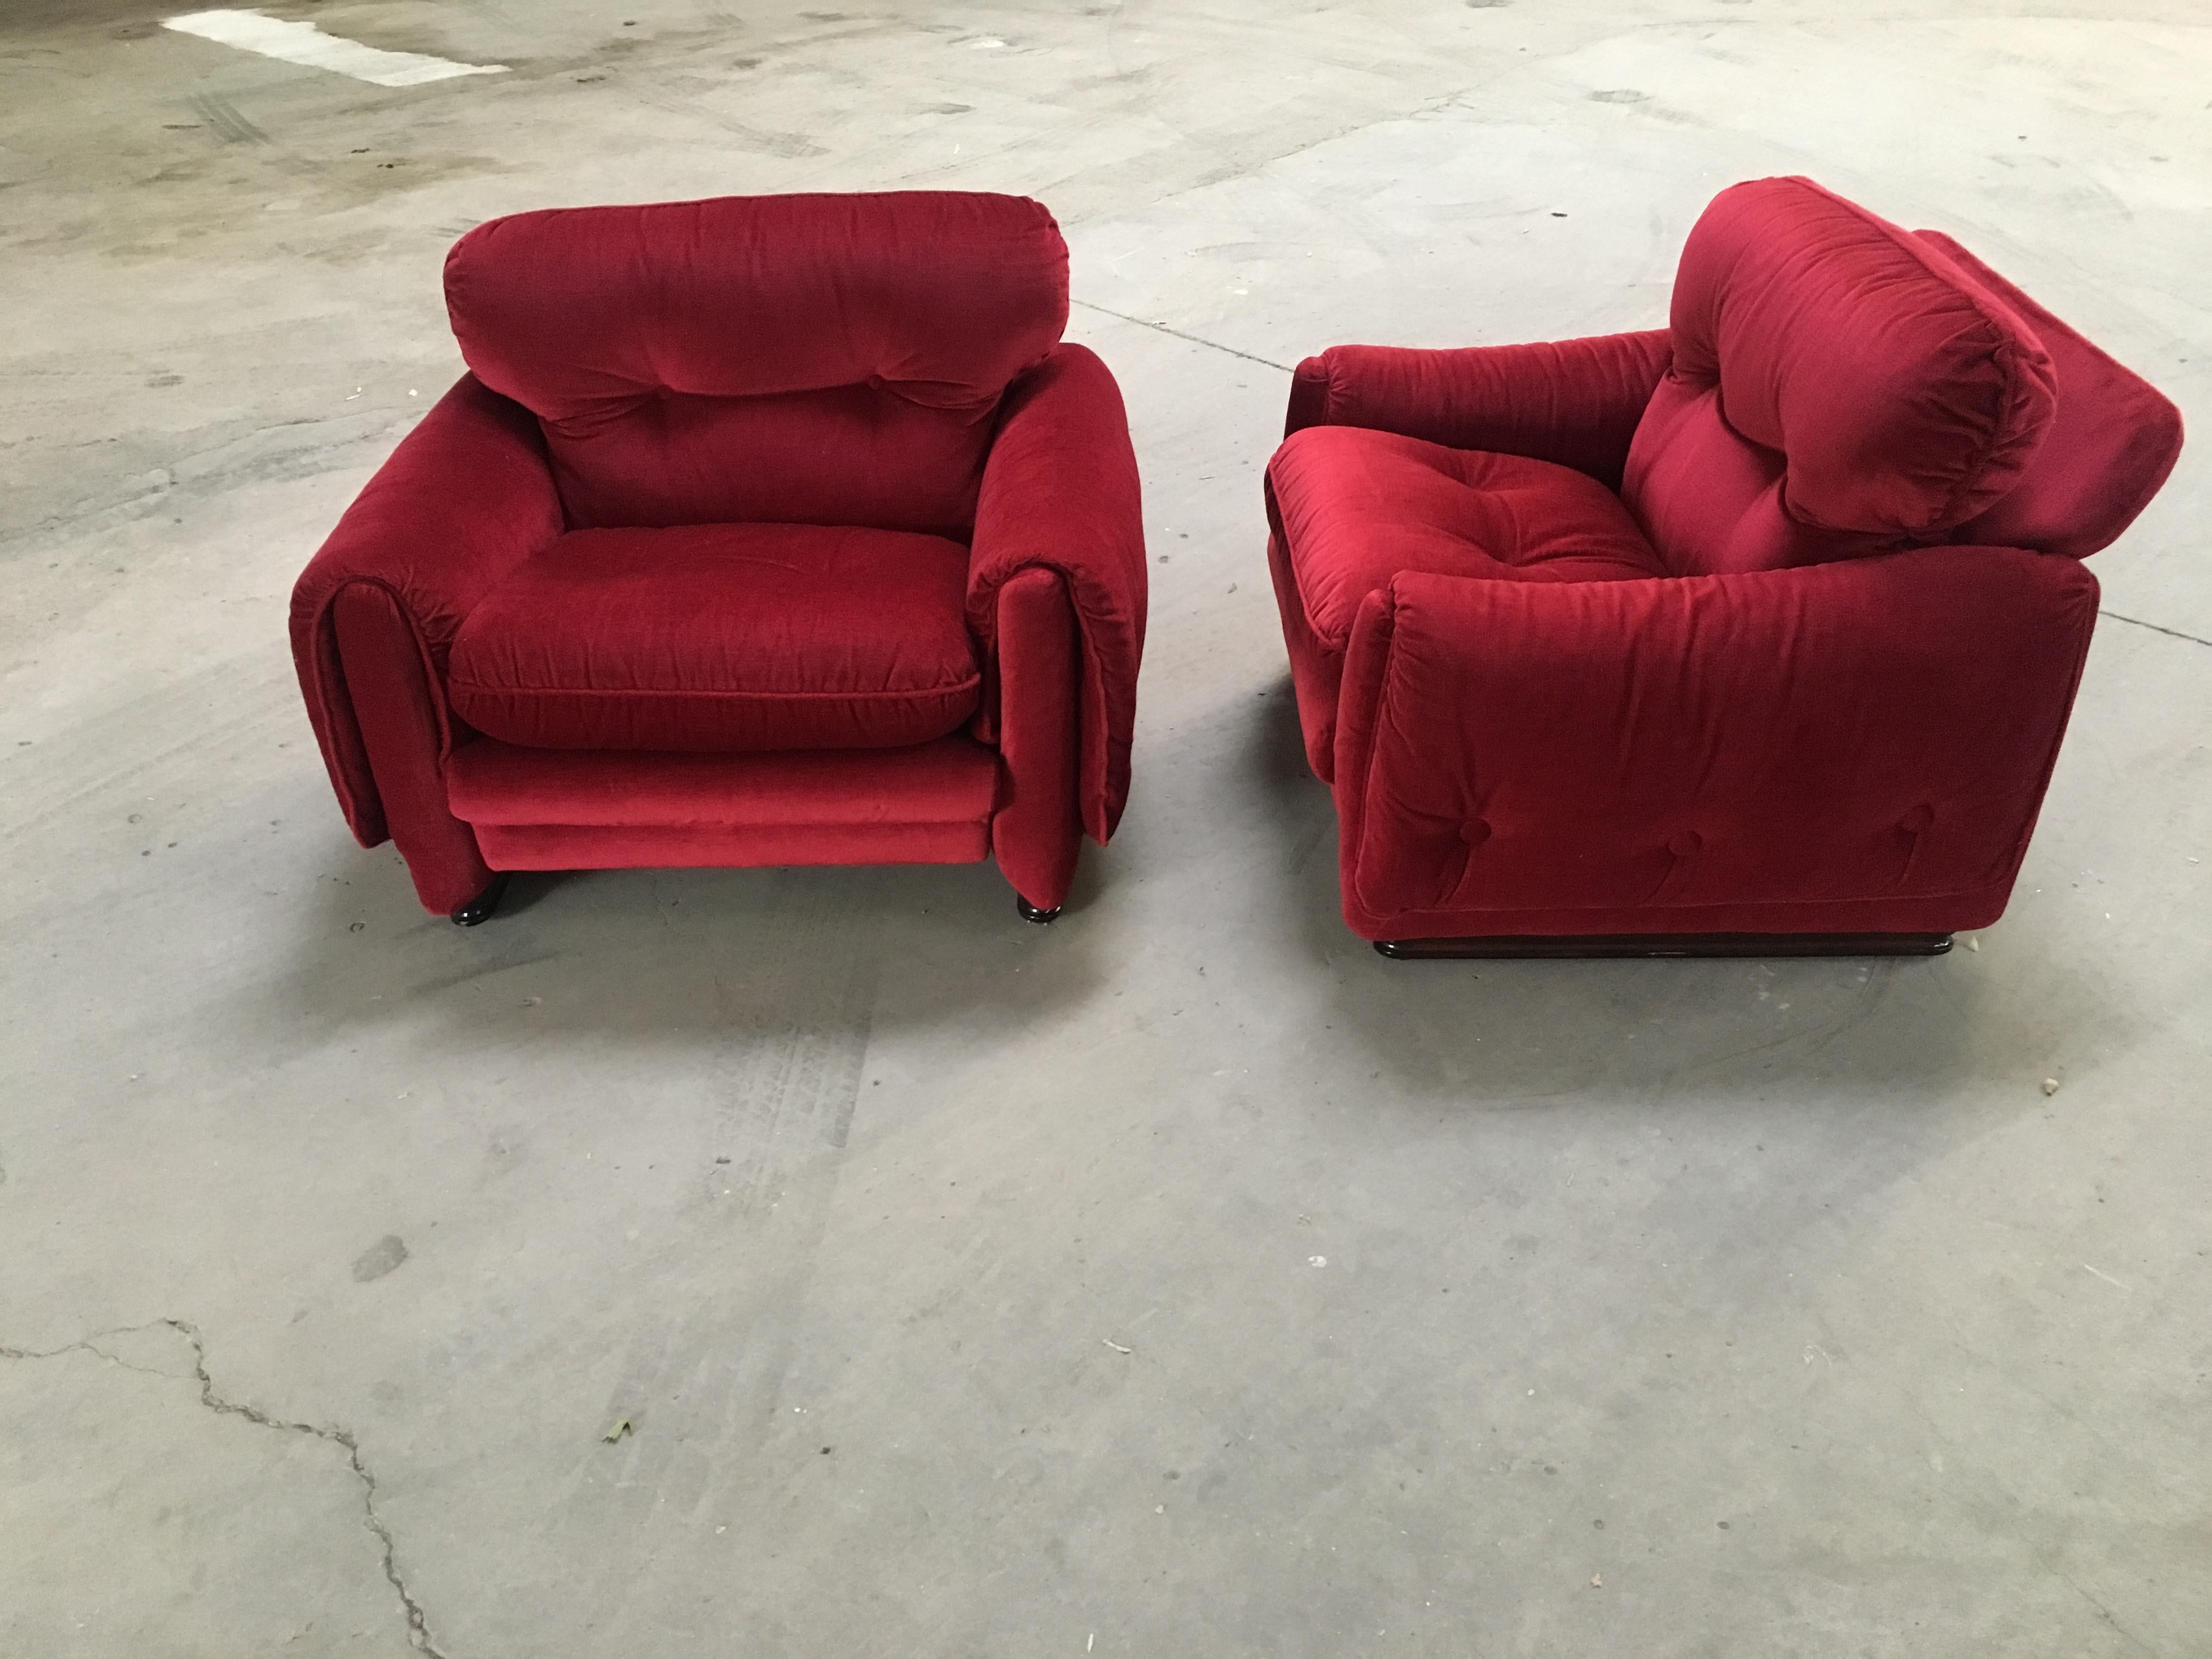 Late 20th Century Mid-Century Modern Italian Pair of Armchairs with Original Fabric, 1970s For Sale